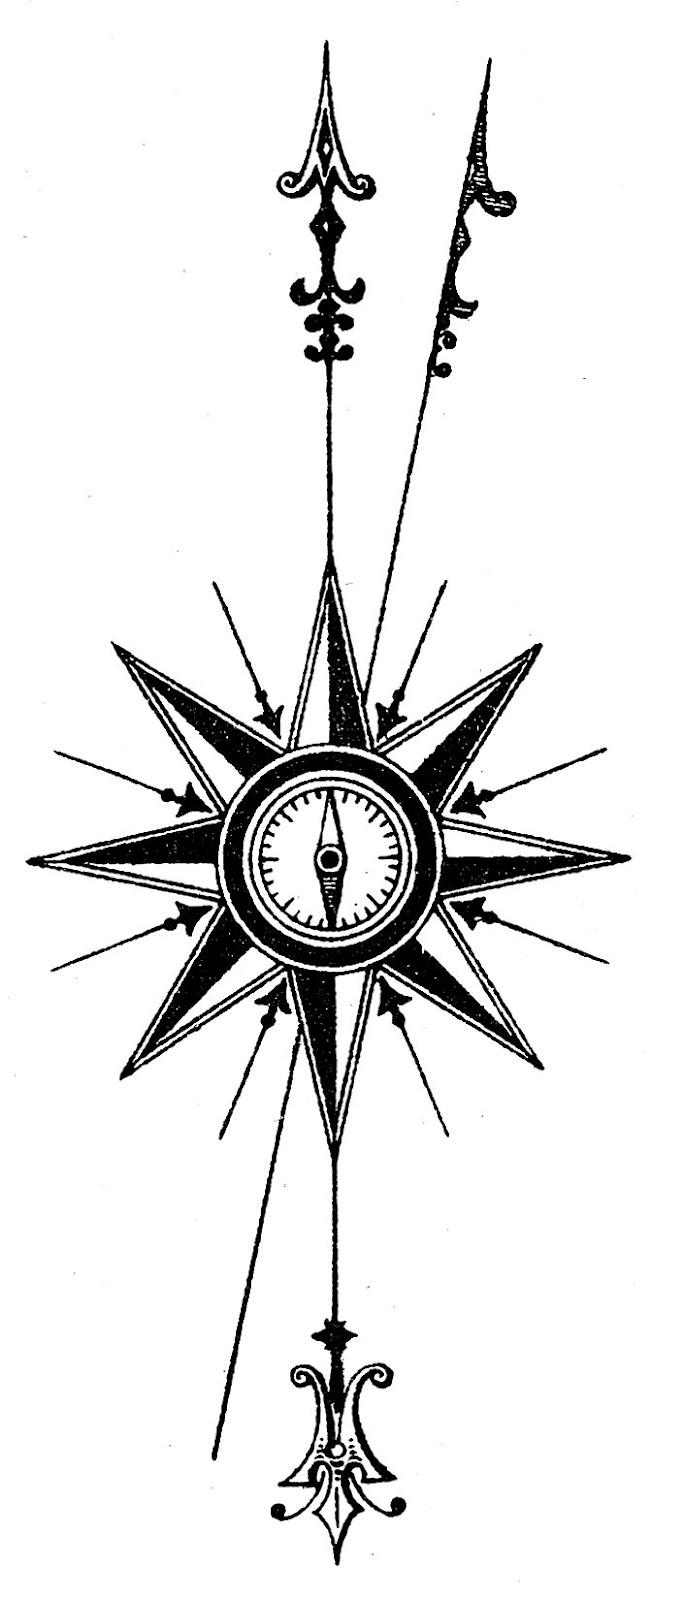 Vintage Steampunk Clip Art - Compass Rose - The Graphics Fairy